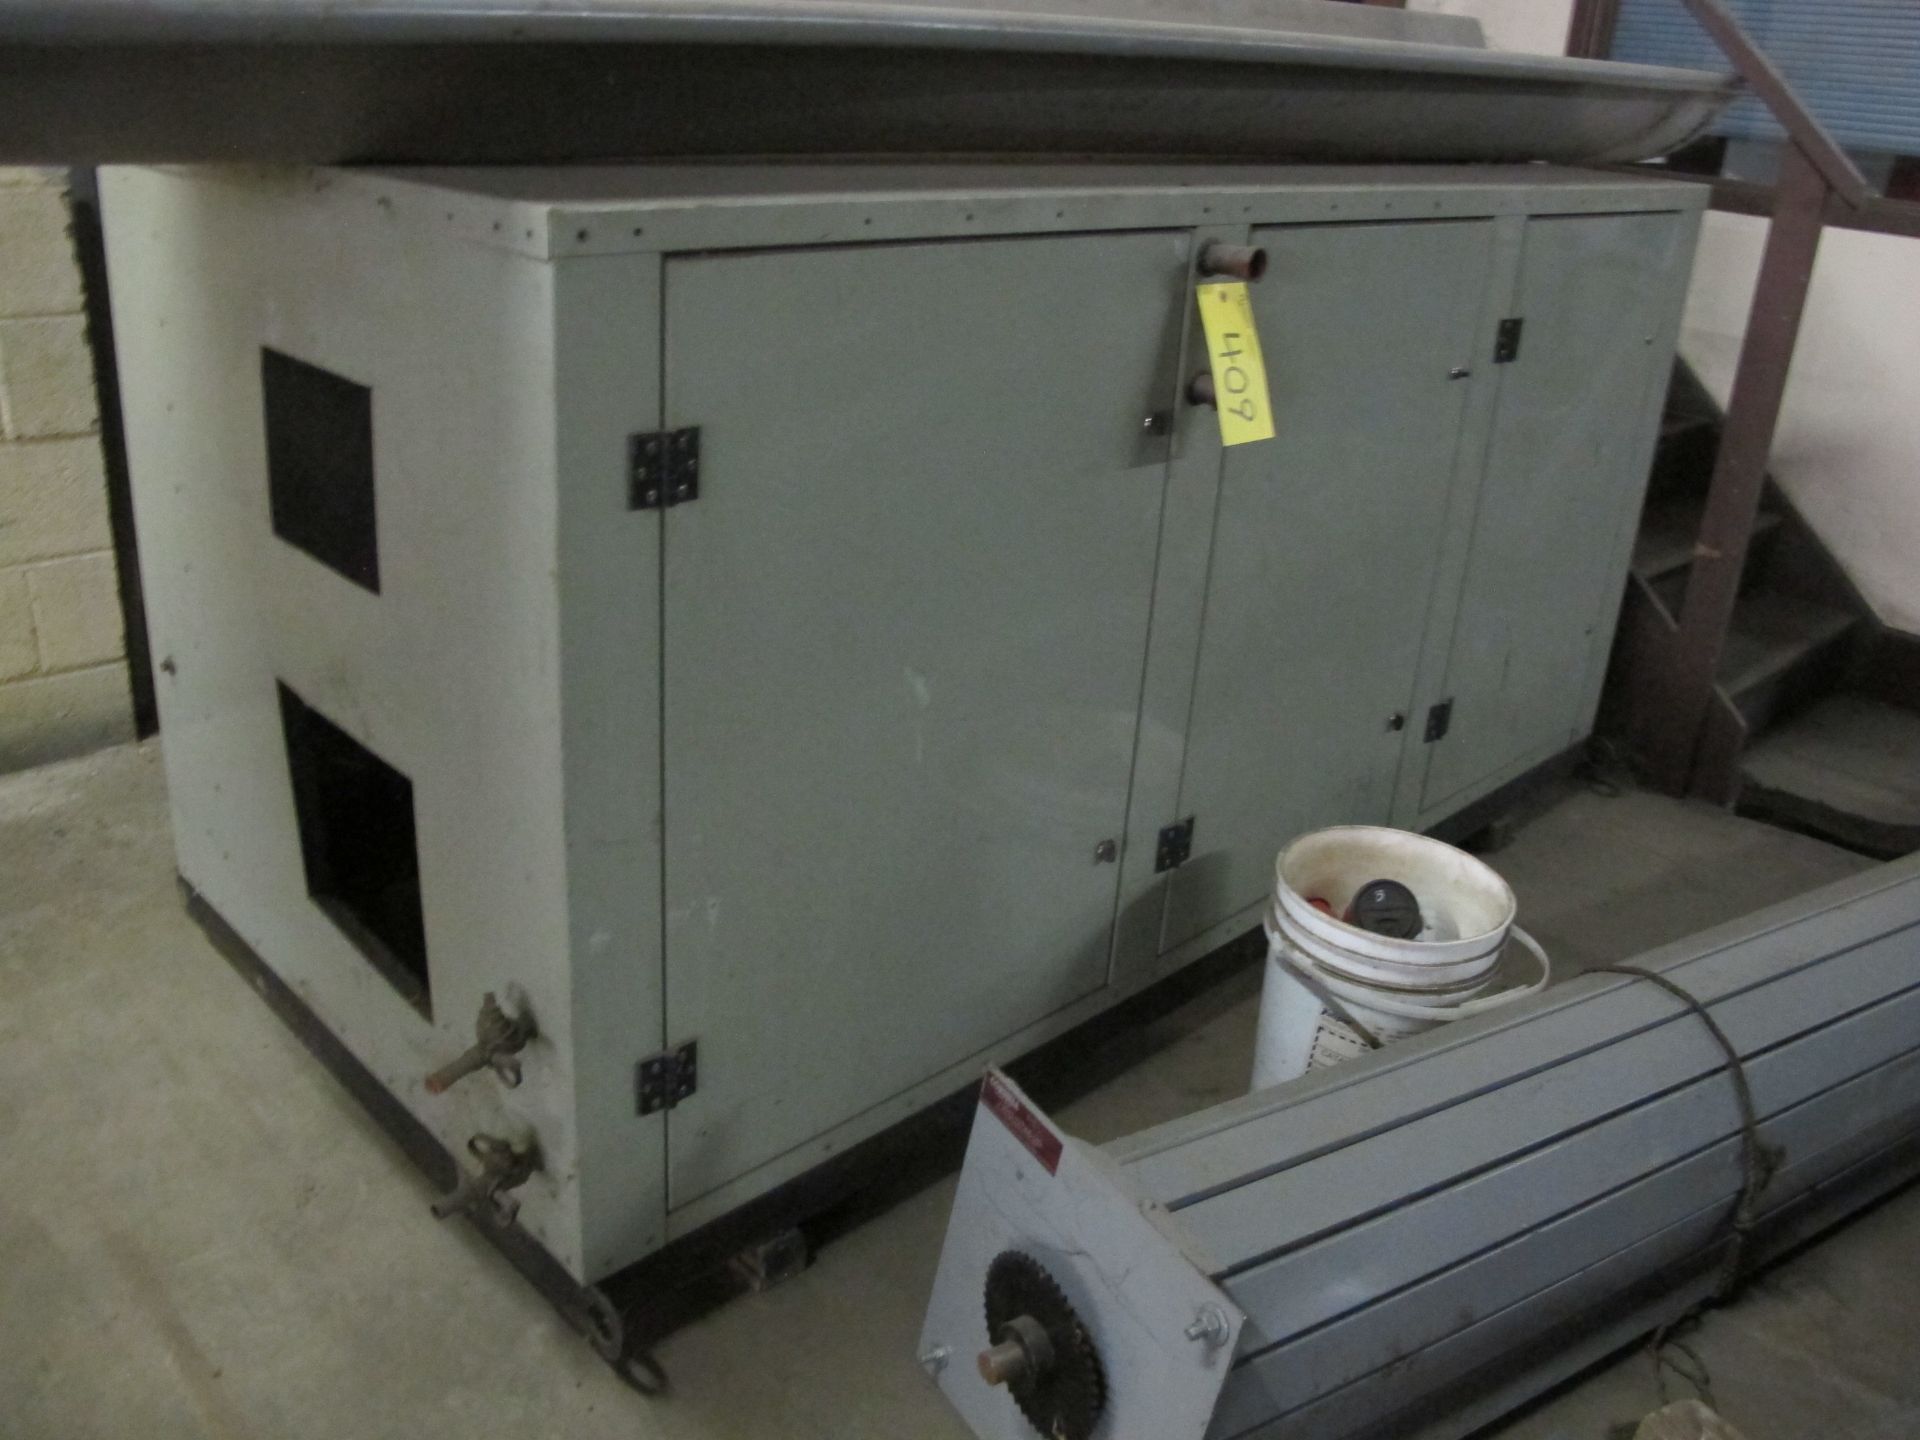 LOT OF 2 CSI AIRMAKEUP UNITS (LOCATED AT 402725 GRAY ROAD 4 WEST, DURHAM, ON) - Image 2 of 2